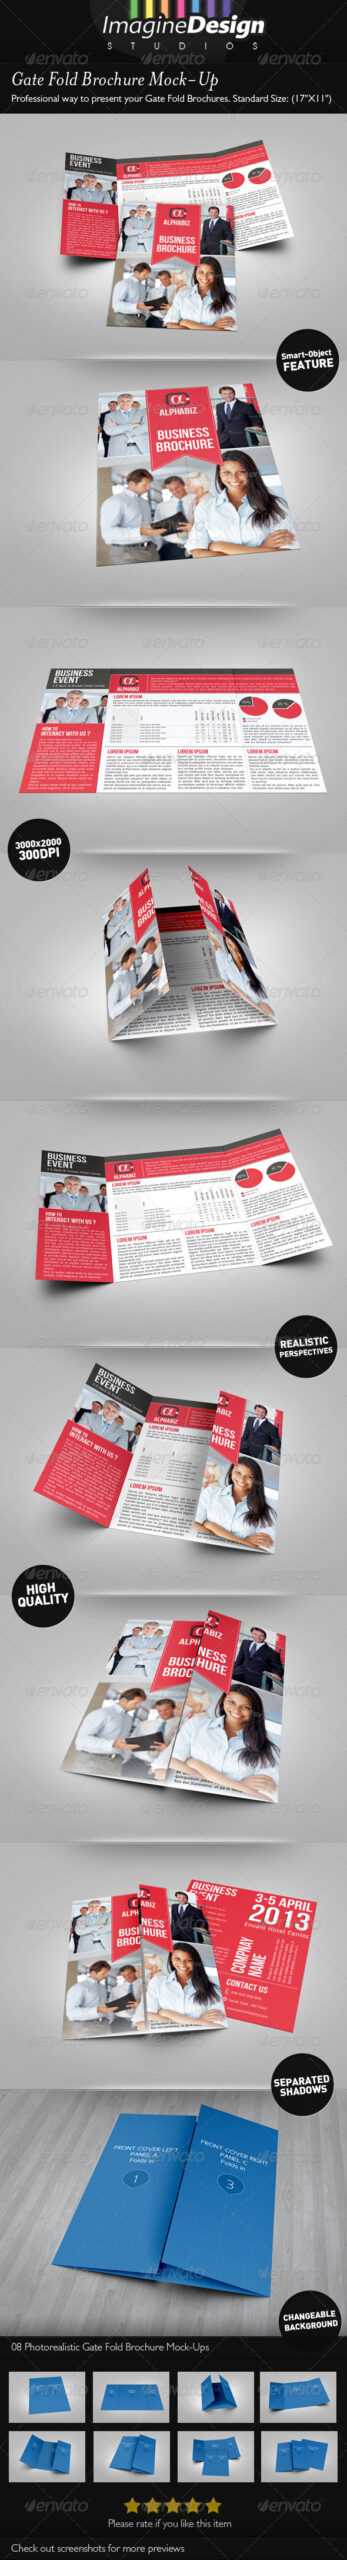 Gatefold Graphics, Designs & Templates From Graphicriver Intended For Gate Fold Brochure Template Indesign